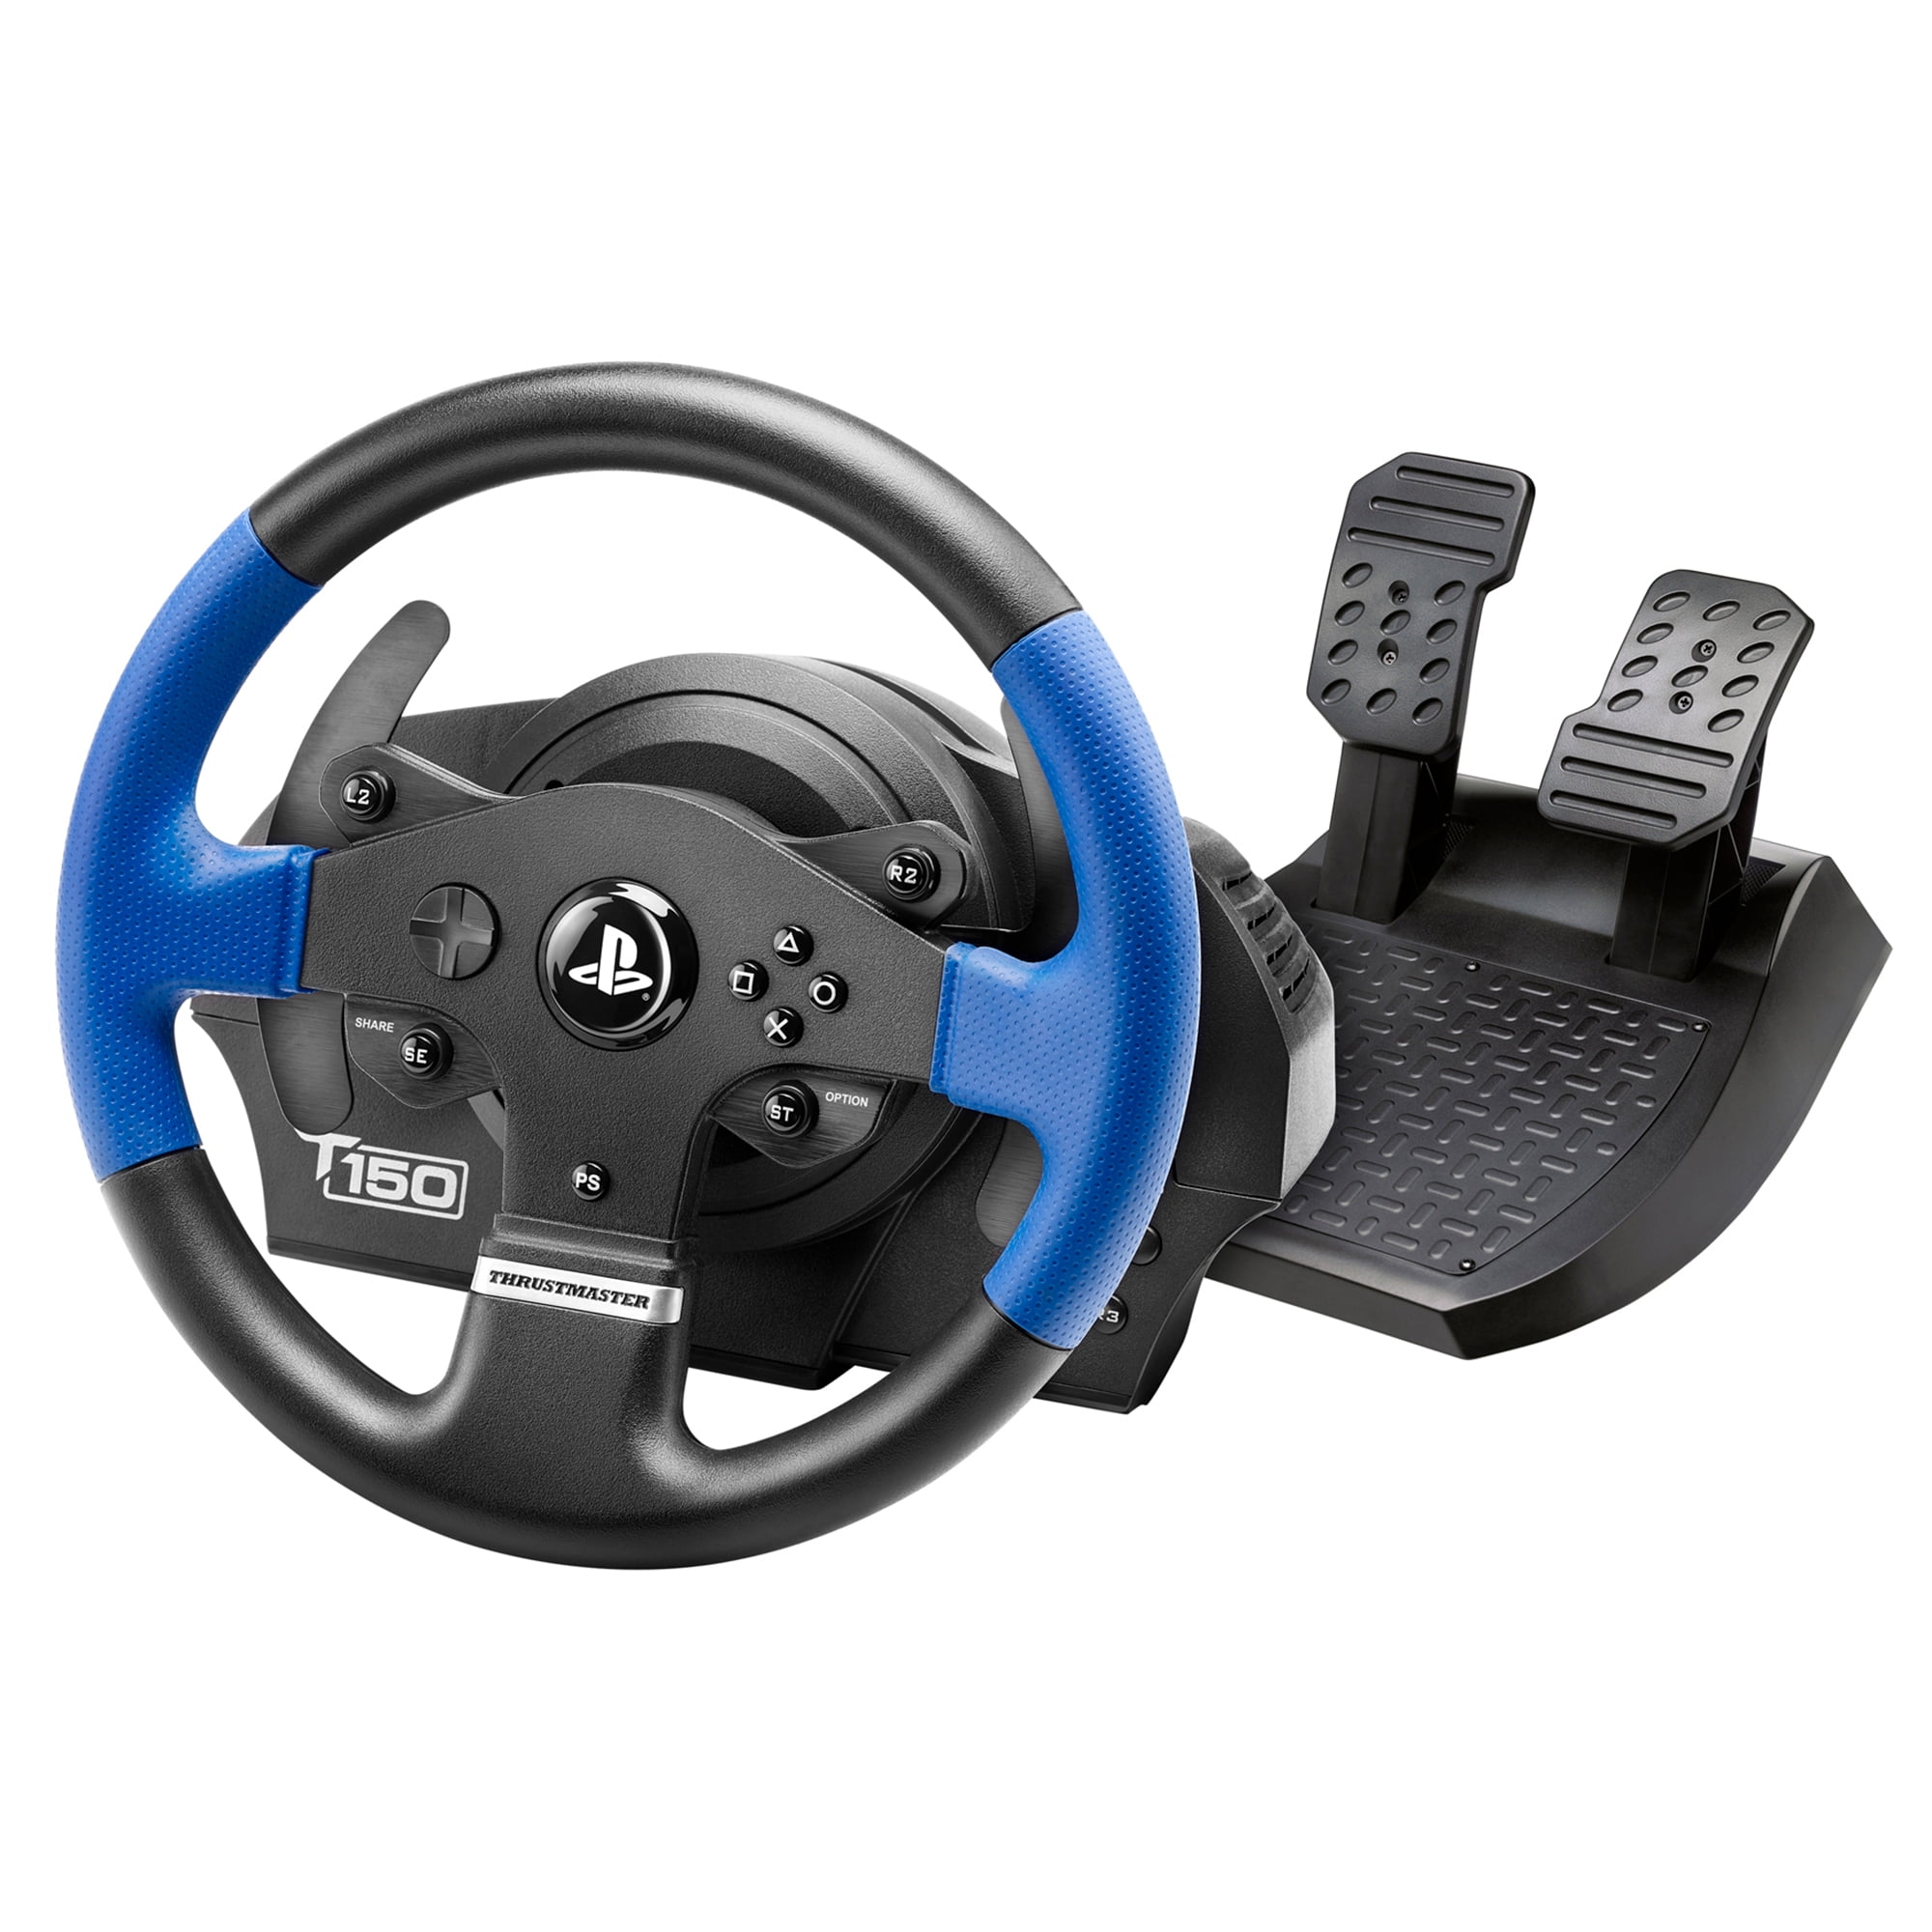 Thrustmaster T150 Racing Wheel and 2 Pedal Set with Shifters for PS4 and PC $129.98 at Walmart